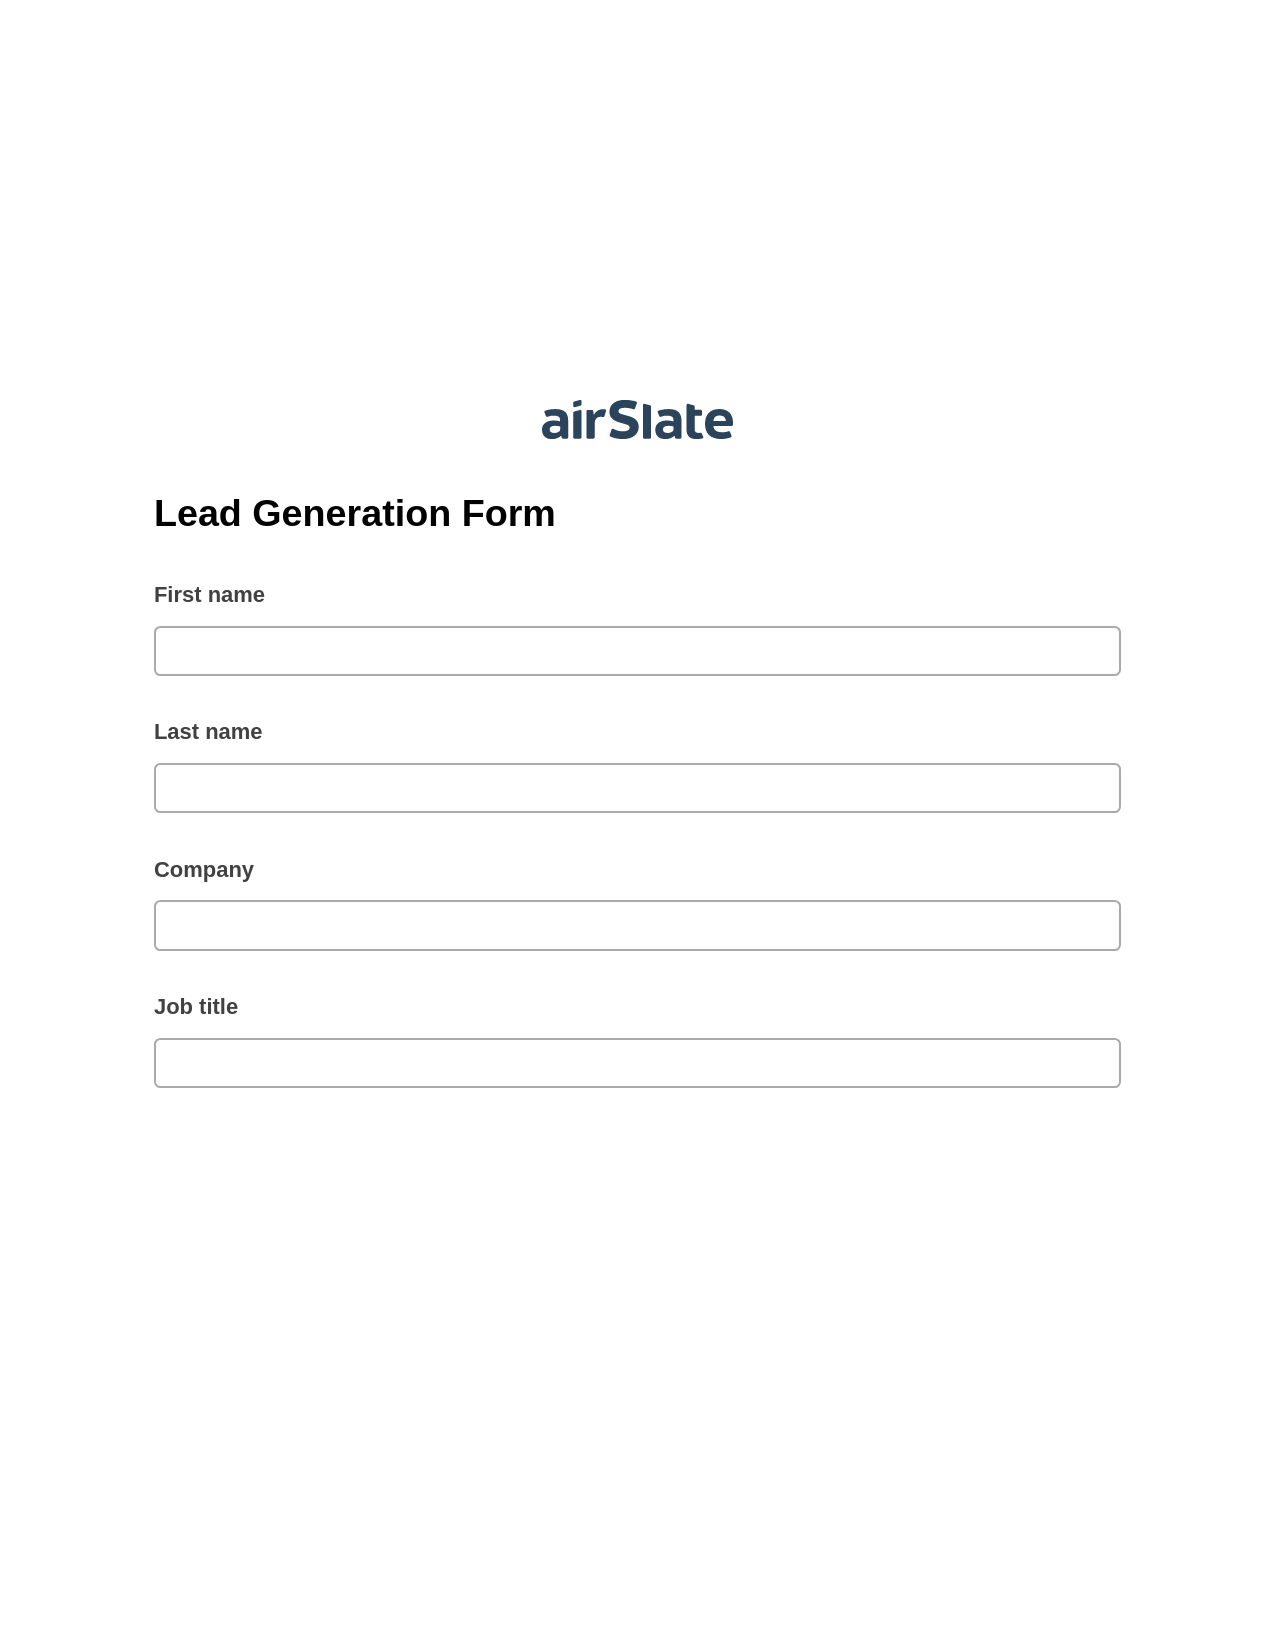 Lead Generation Form Pre-fill from AirTable Bot, Send a Slate to Salesforce Contact Bot, Export to Smartsheet